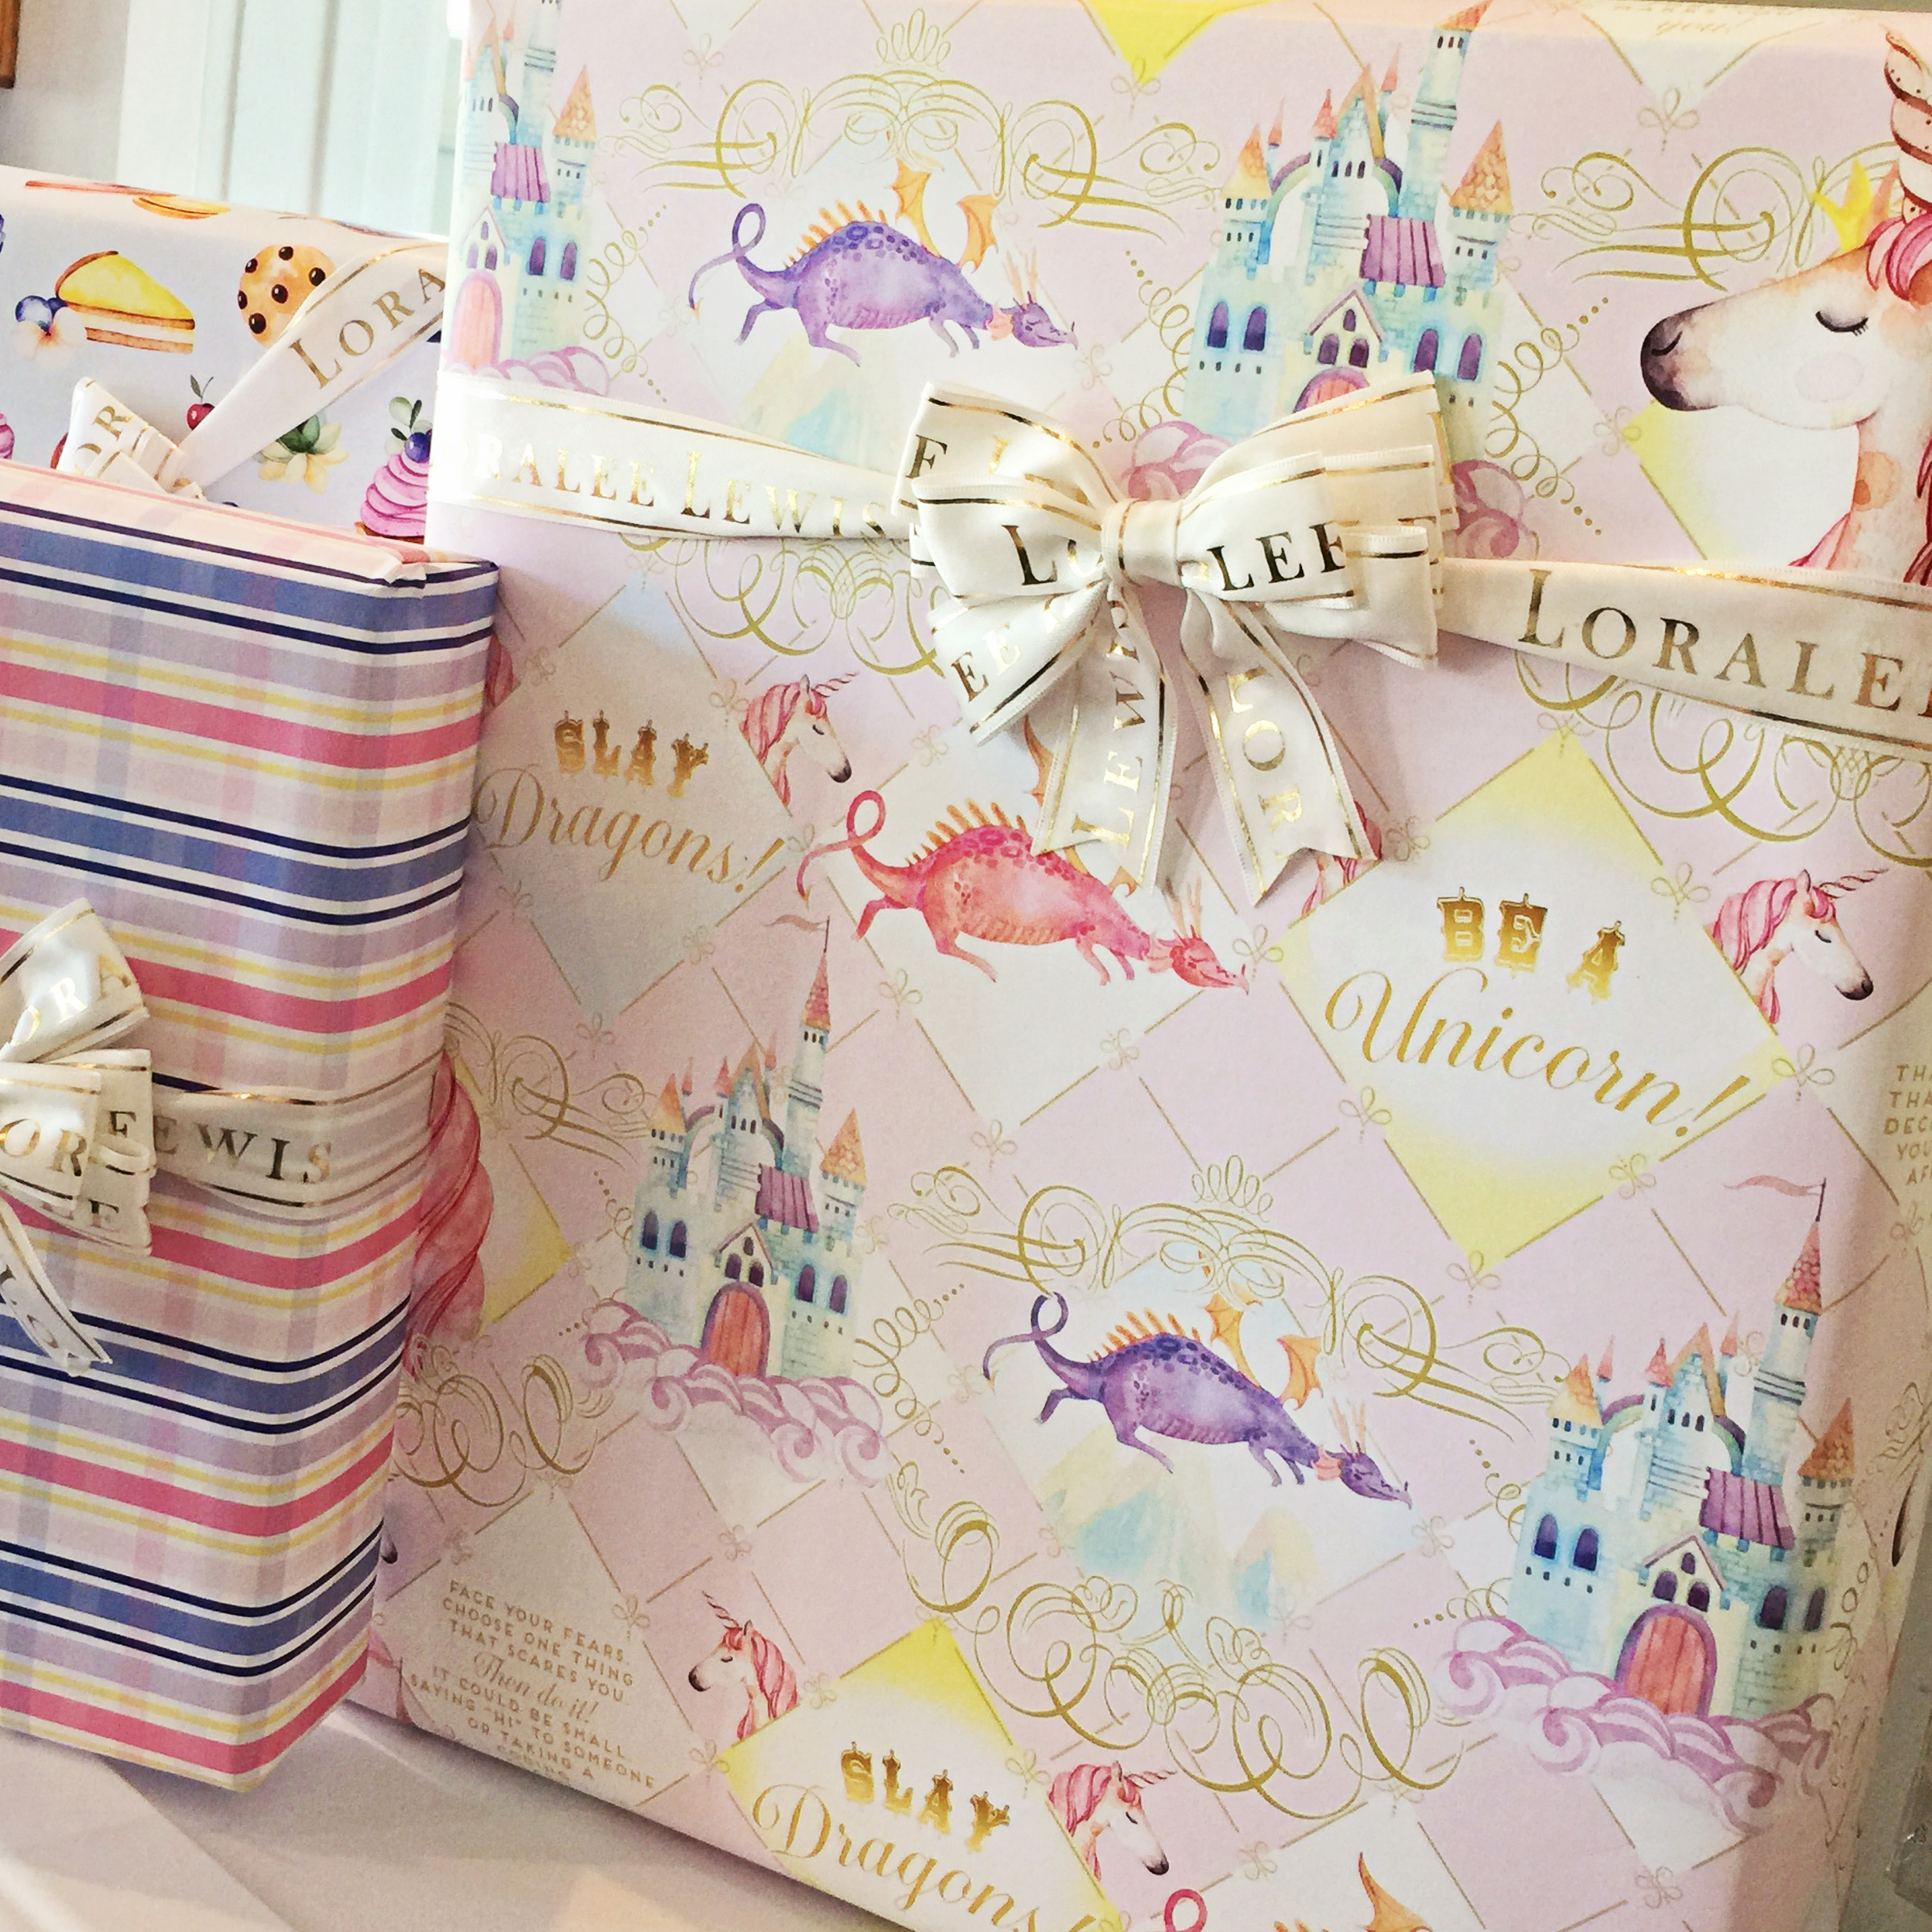 New Unicorn Wrapping Paper Collection – Loralee Lewis